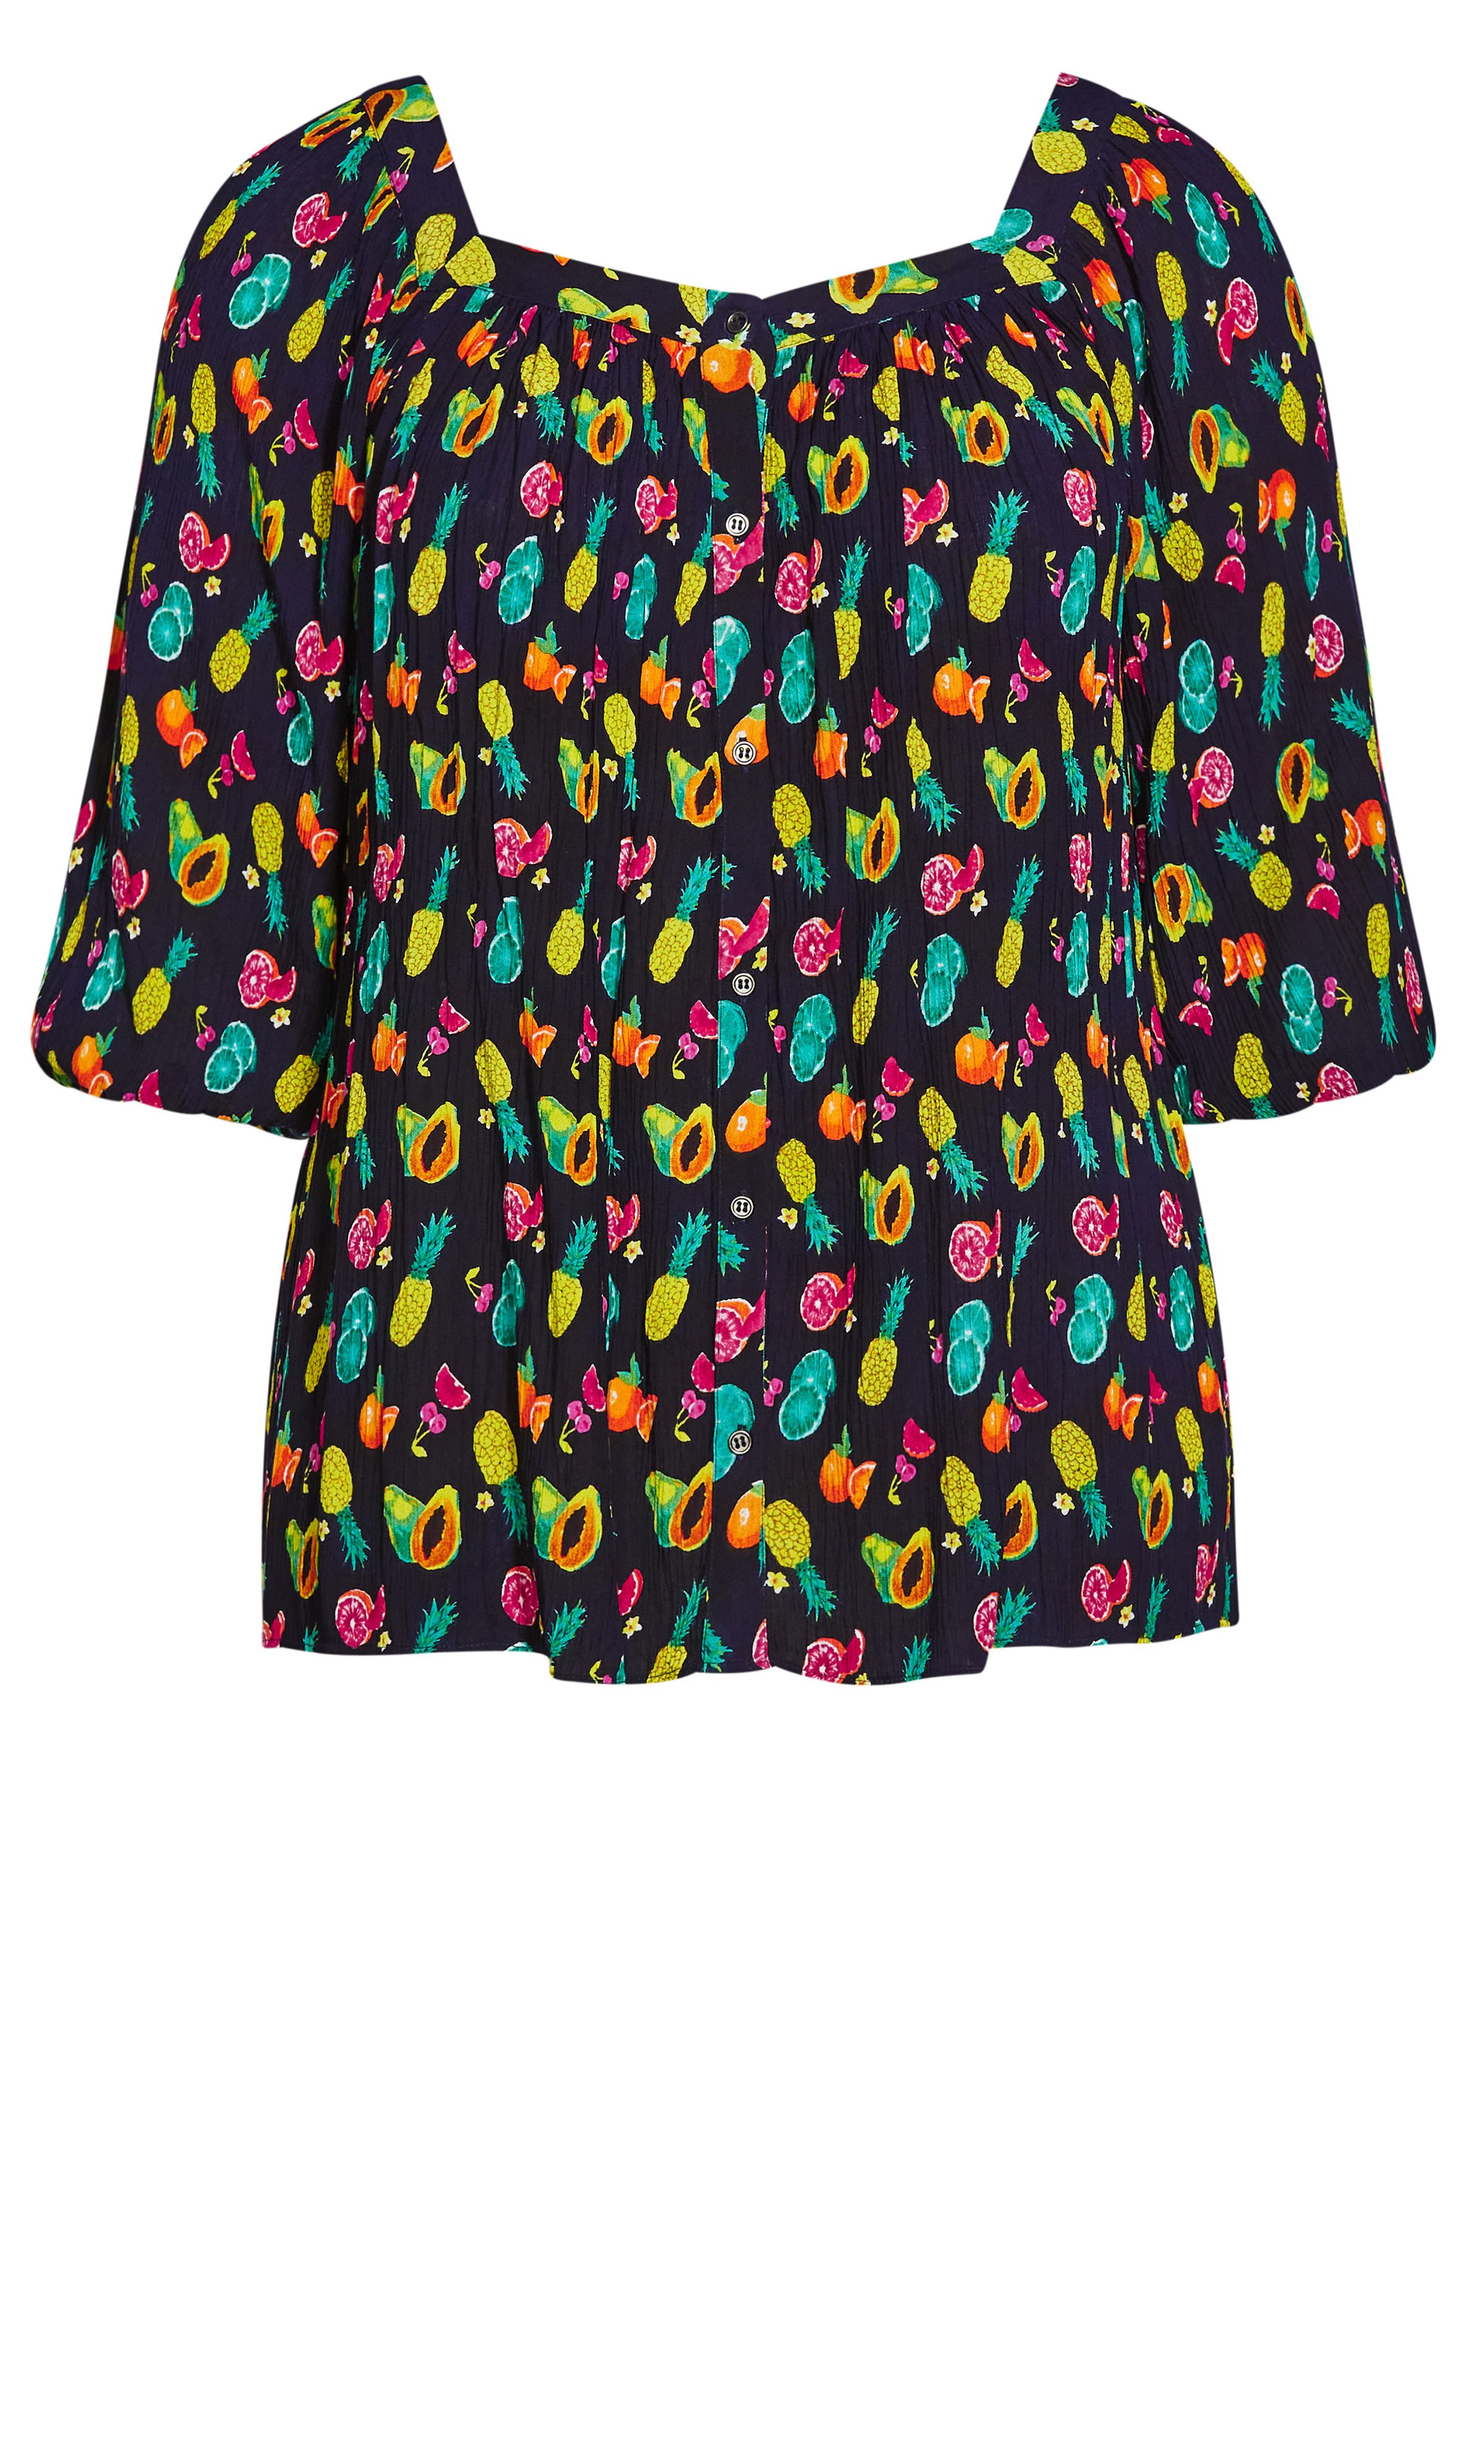 A little bit playful and all kinds of stylish, the Fruit Button Through Top brings a youthful touch to any wardrobe. Featuring a square neckline, lightweight fabrication and fun-loving fruit print for major summer vibes, this breezy blouse ticks all the boxes! Key Features Include: - Square neckline - 3/4 sleeves - Textured non-stretch fabrication - Relaxed fit - Pull over style - Unlined - Hip length Team with skinny jeans, espadrilles and a bold lip for an upstyled Saturday outfit.